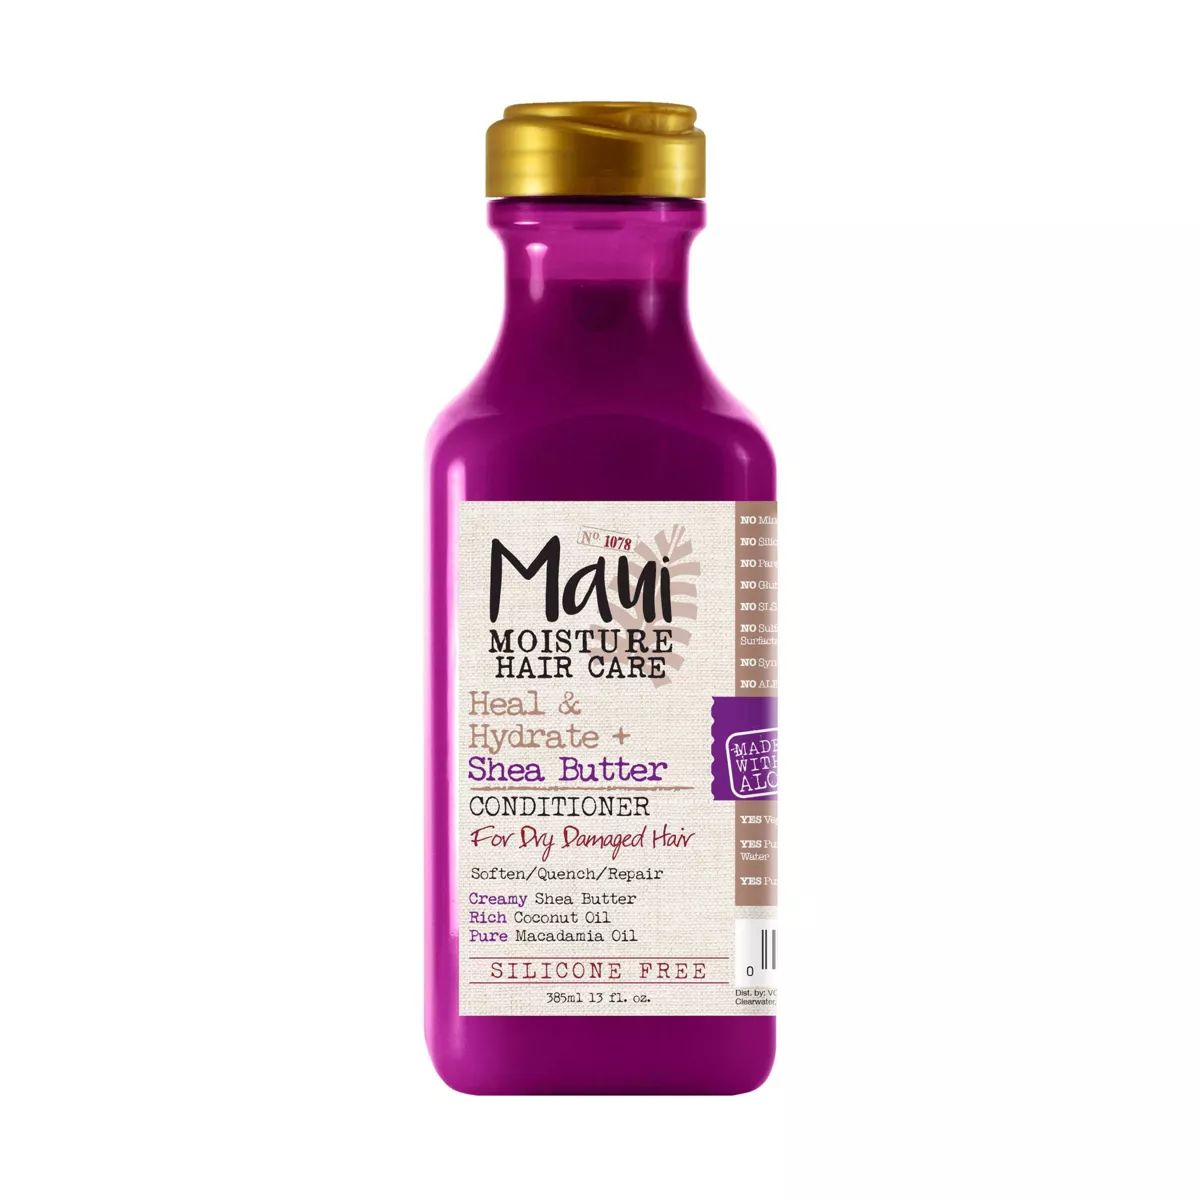 Maui Moisture Heal & Hydrate + Shea Butter Conditioner to Repair & Deeply Moisturize Tight Curly ... | Target